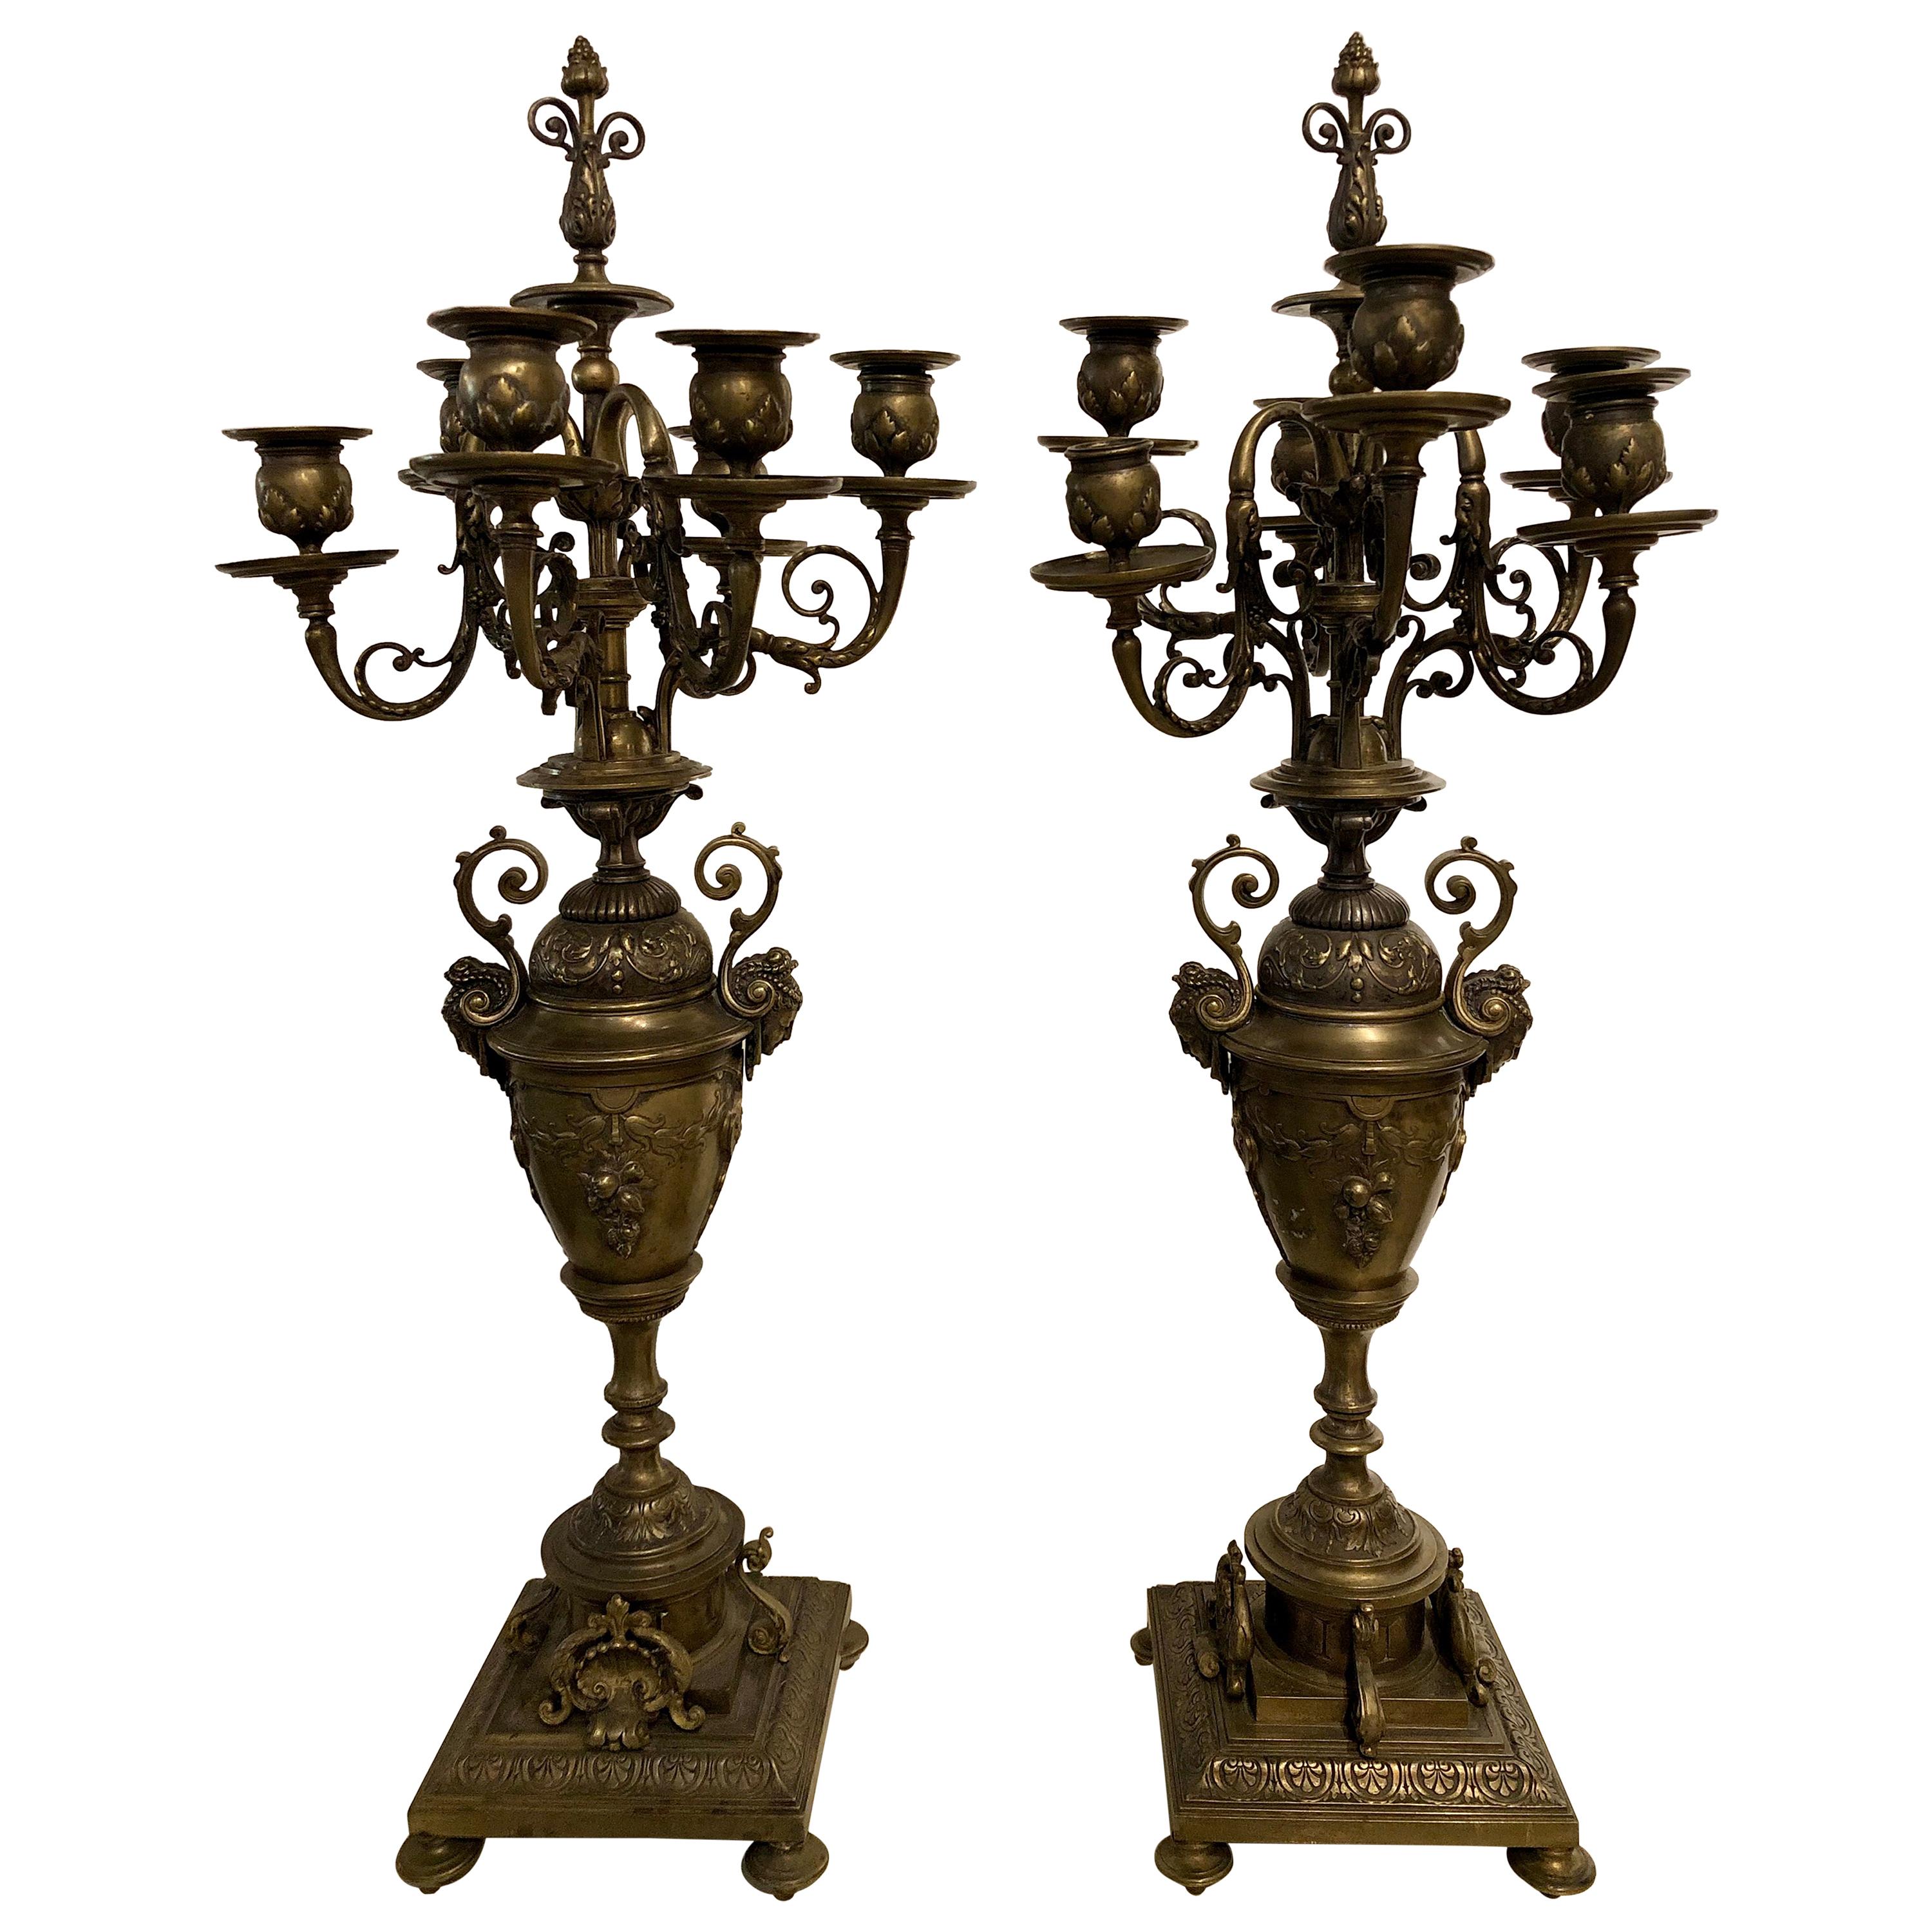 Pair of Brass Six-Arm Candelabras Bearing Figurative Faces and Fruits